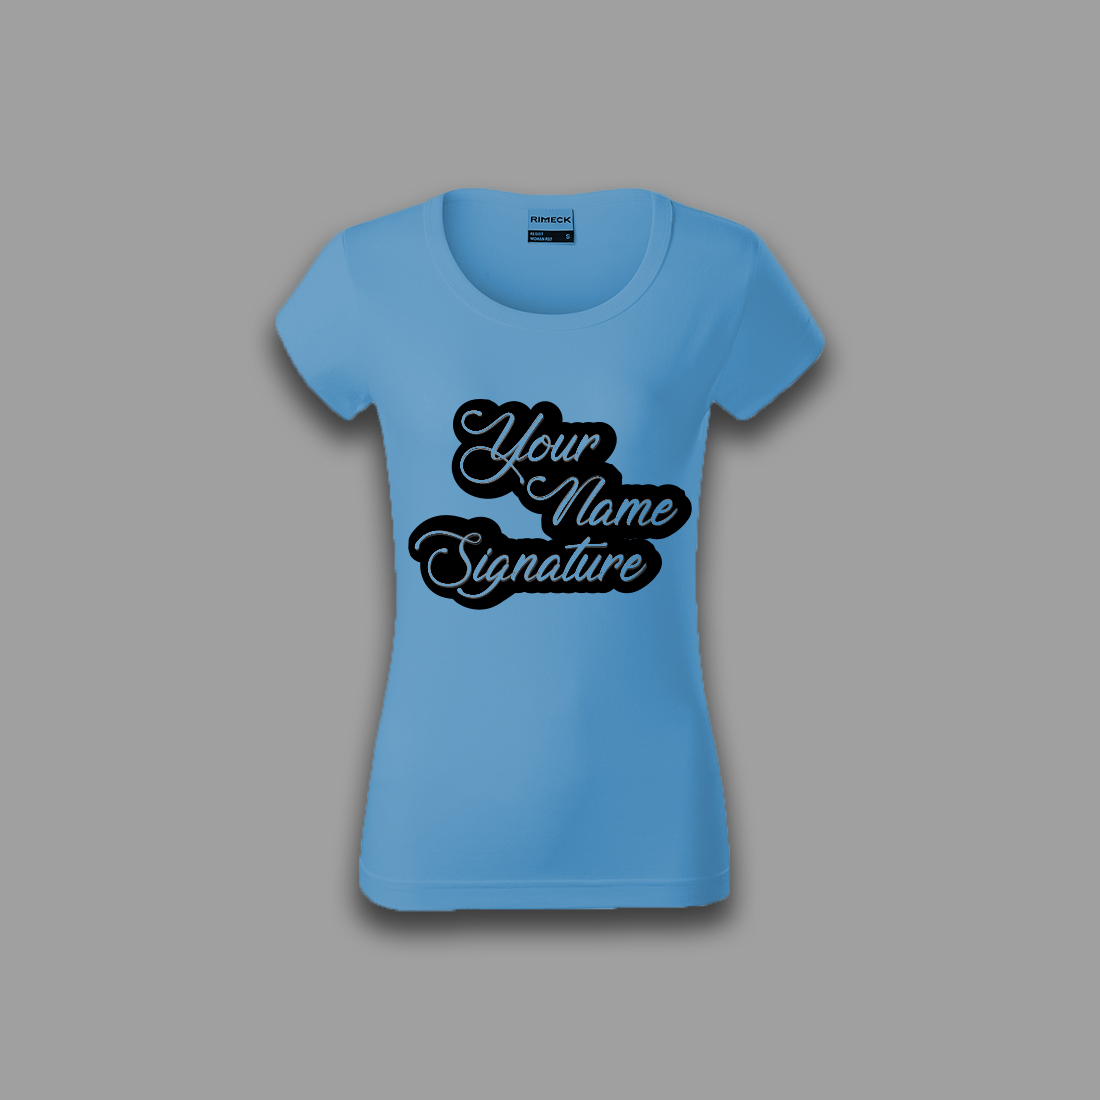 Image of a blue t-shirt with a wonderful inscription your name signature